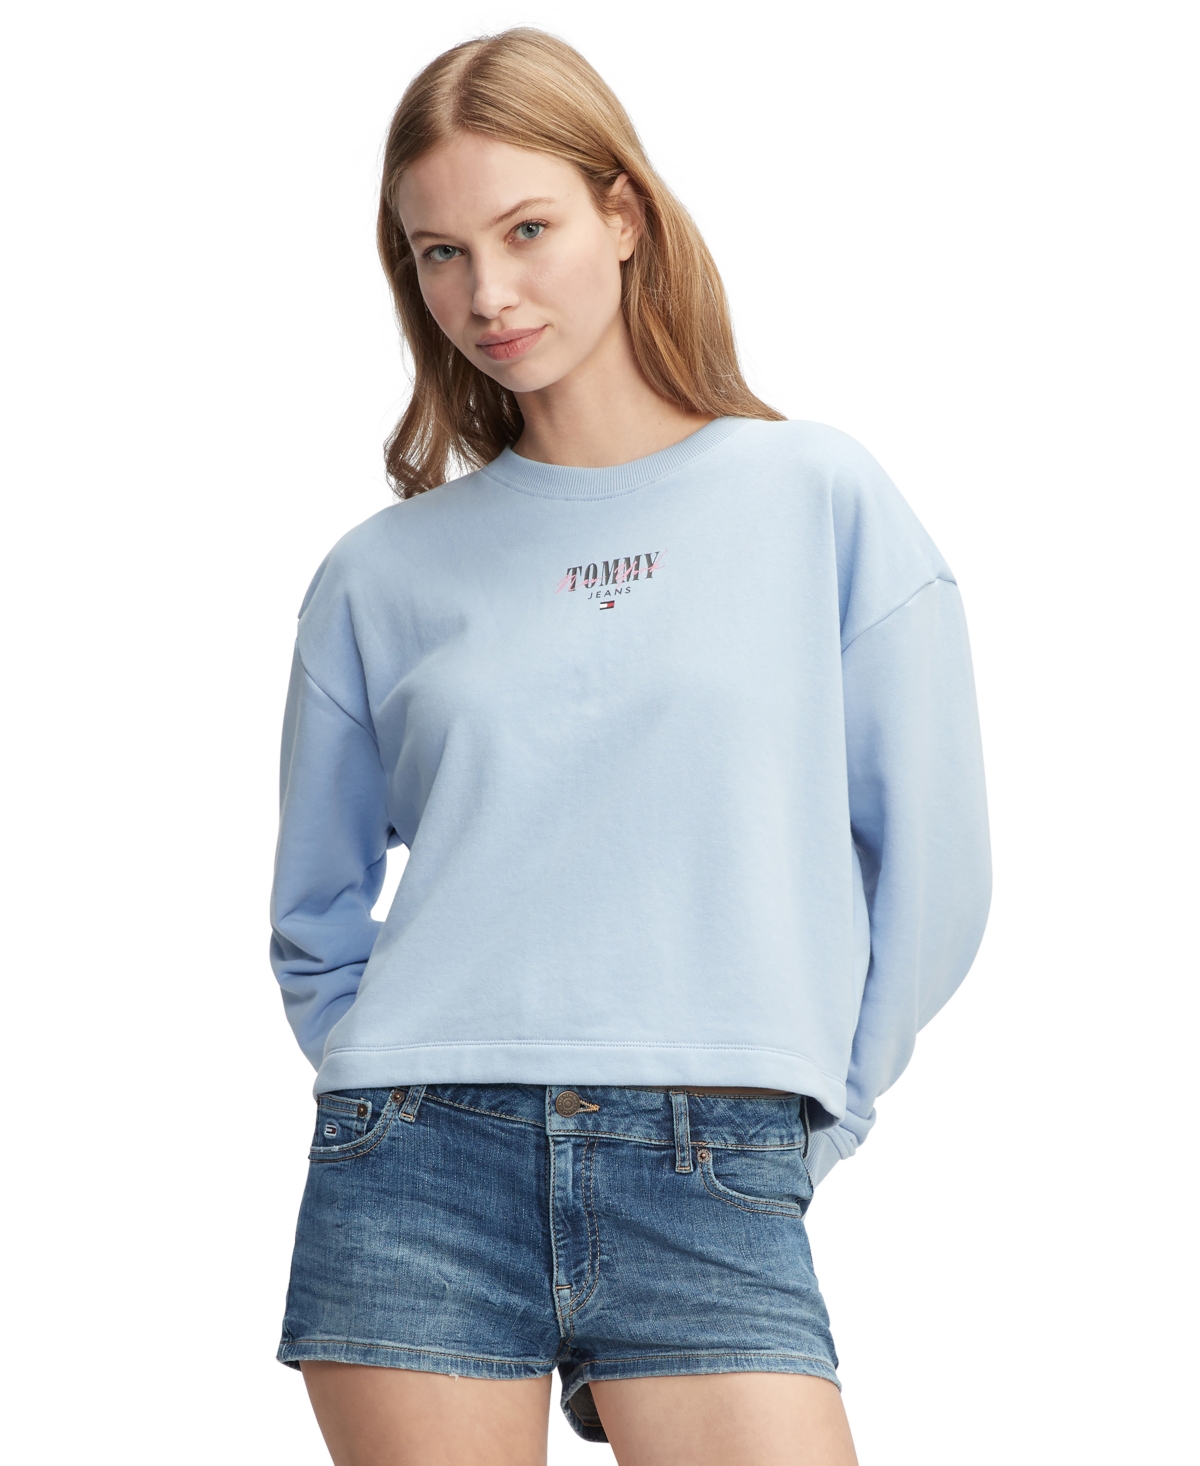 Women's Relaxed-Fit Essential Logo Crewneck Sweater - Moderate Blue